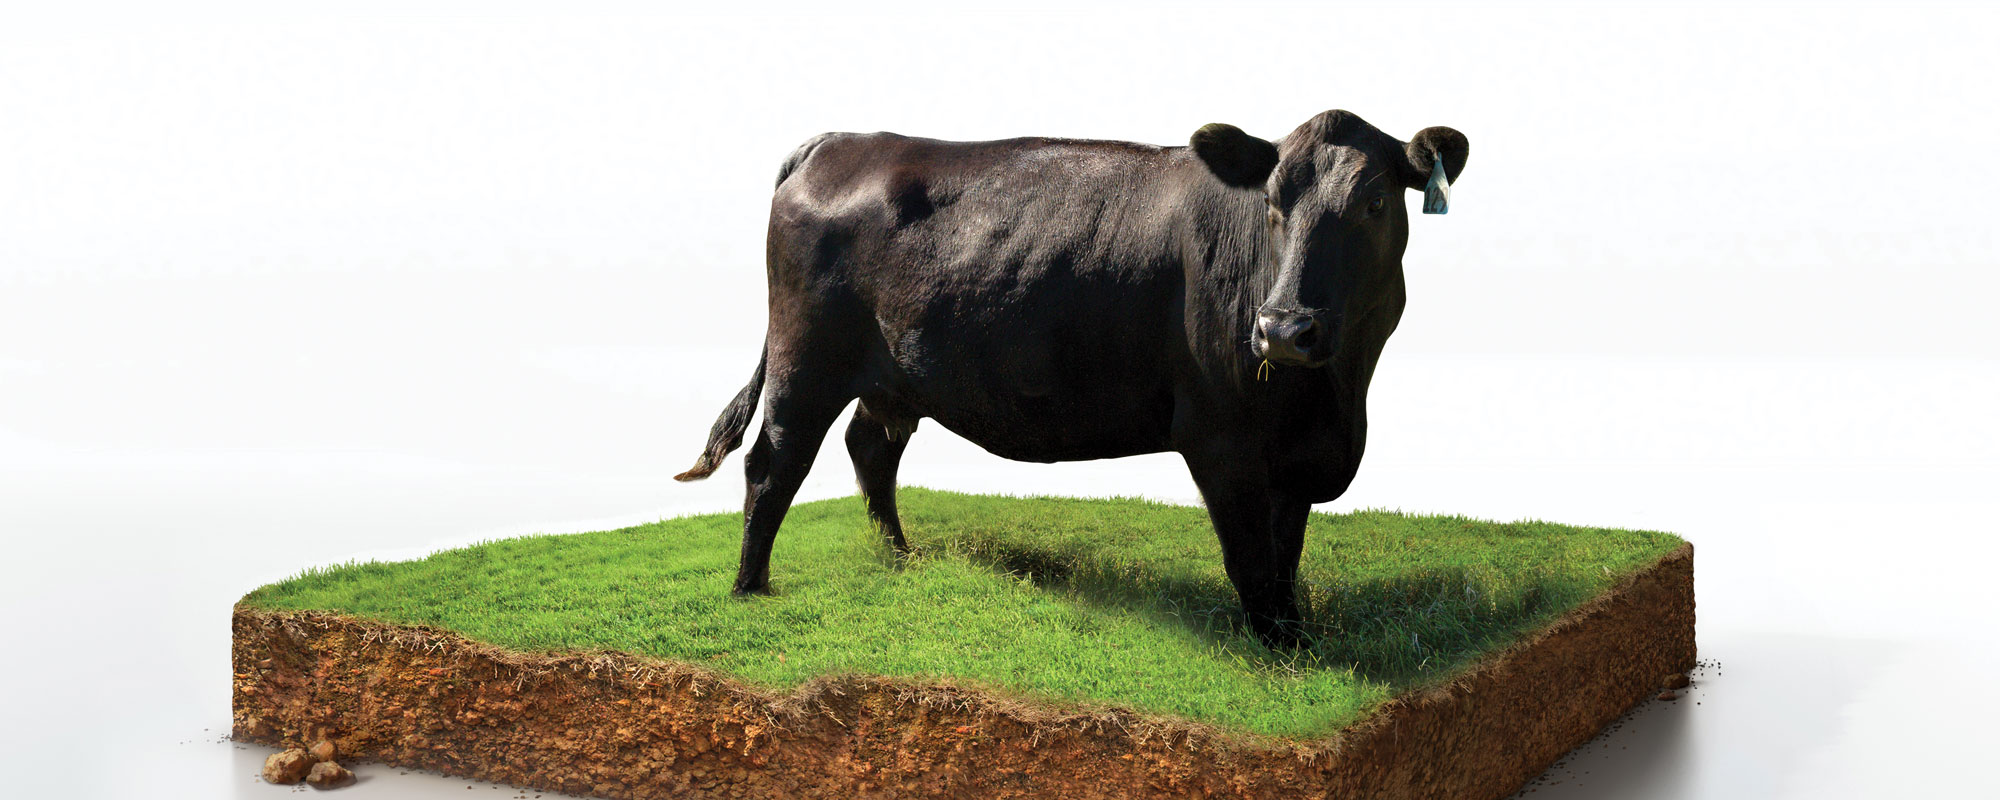 Cow standing on cross-section of soil